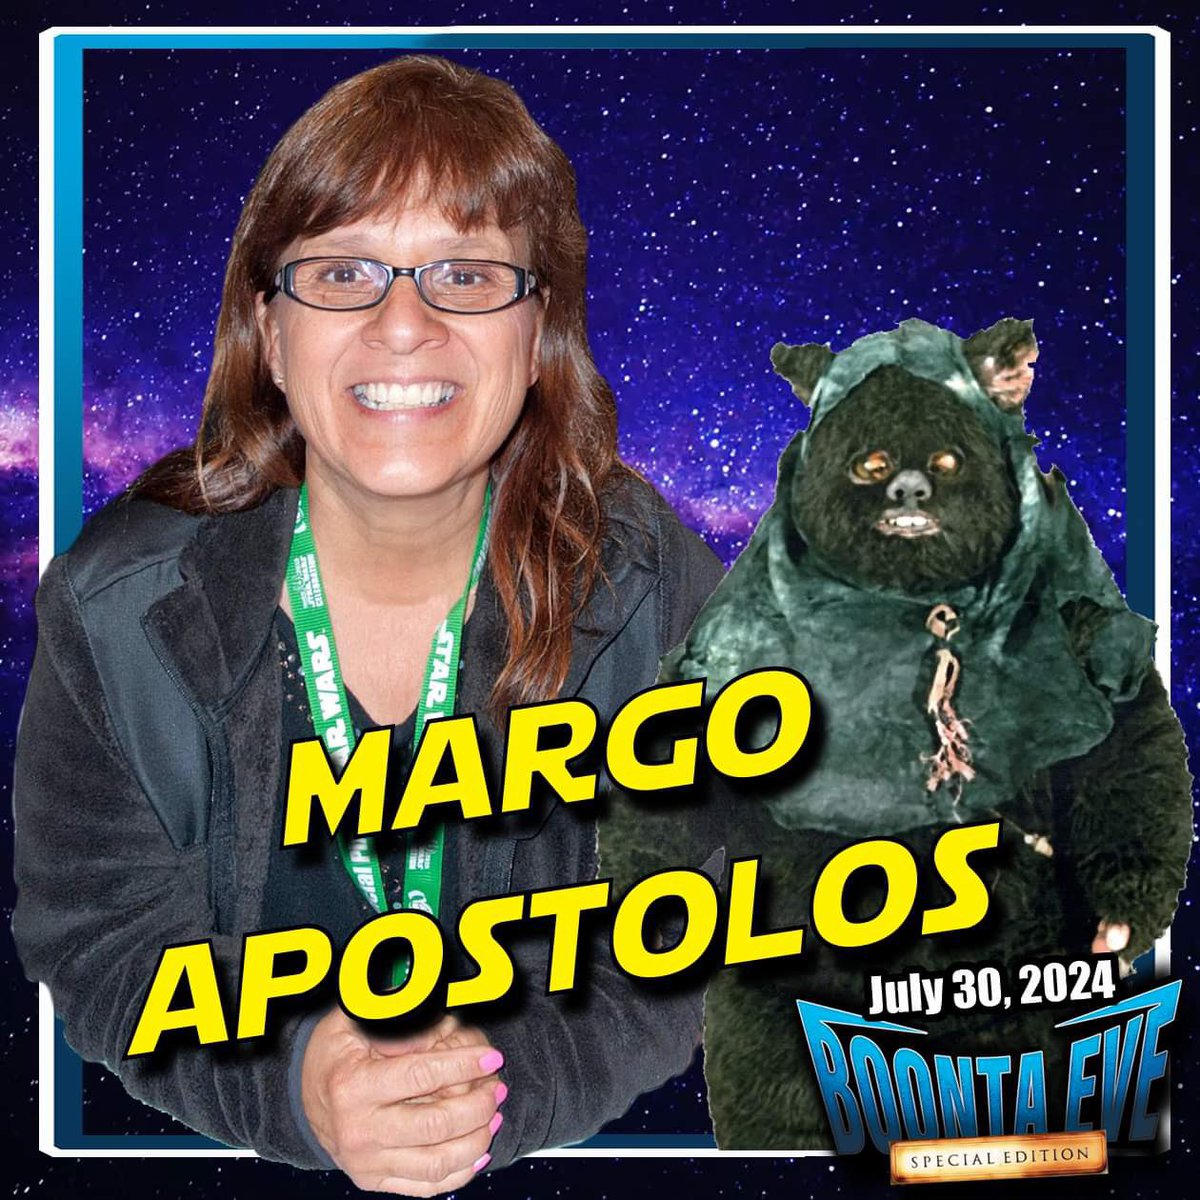 We are very excited to welcome Margo Apostolos to #BoontaEve Special Edition Anaheim July 30th! #StarWars #Ewoks #YubNub